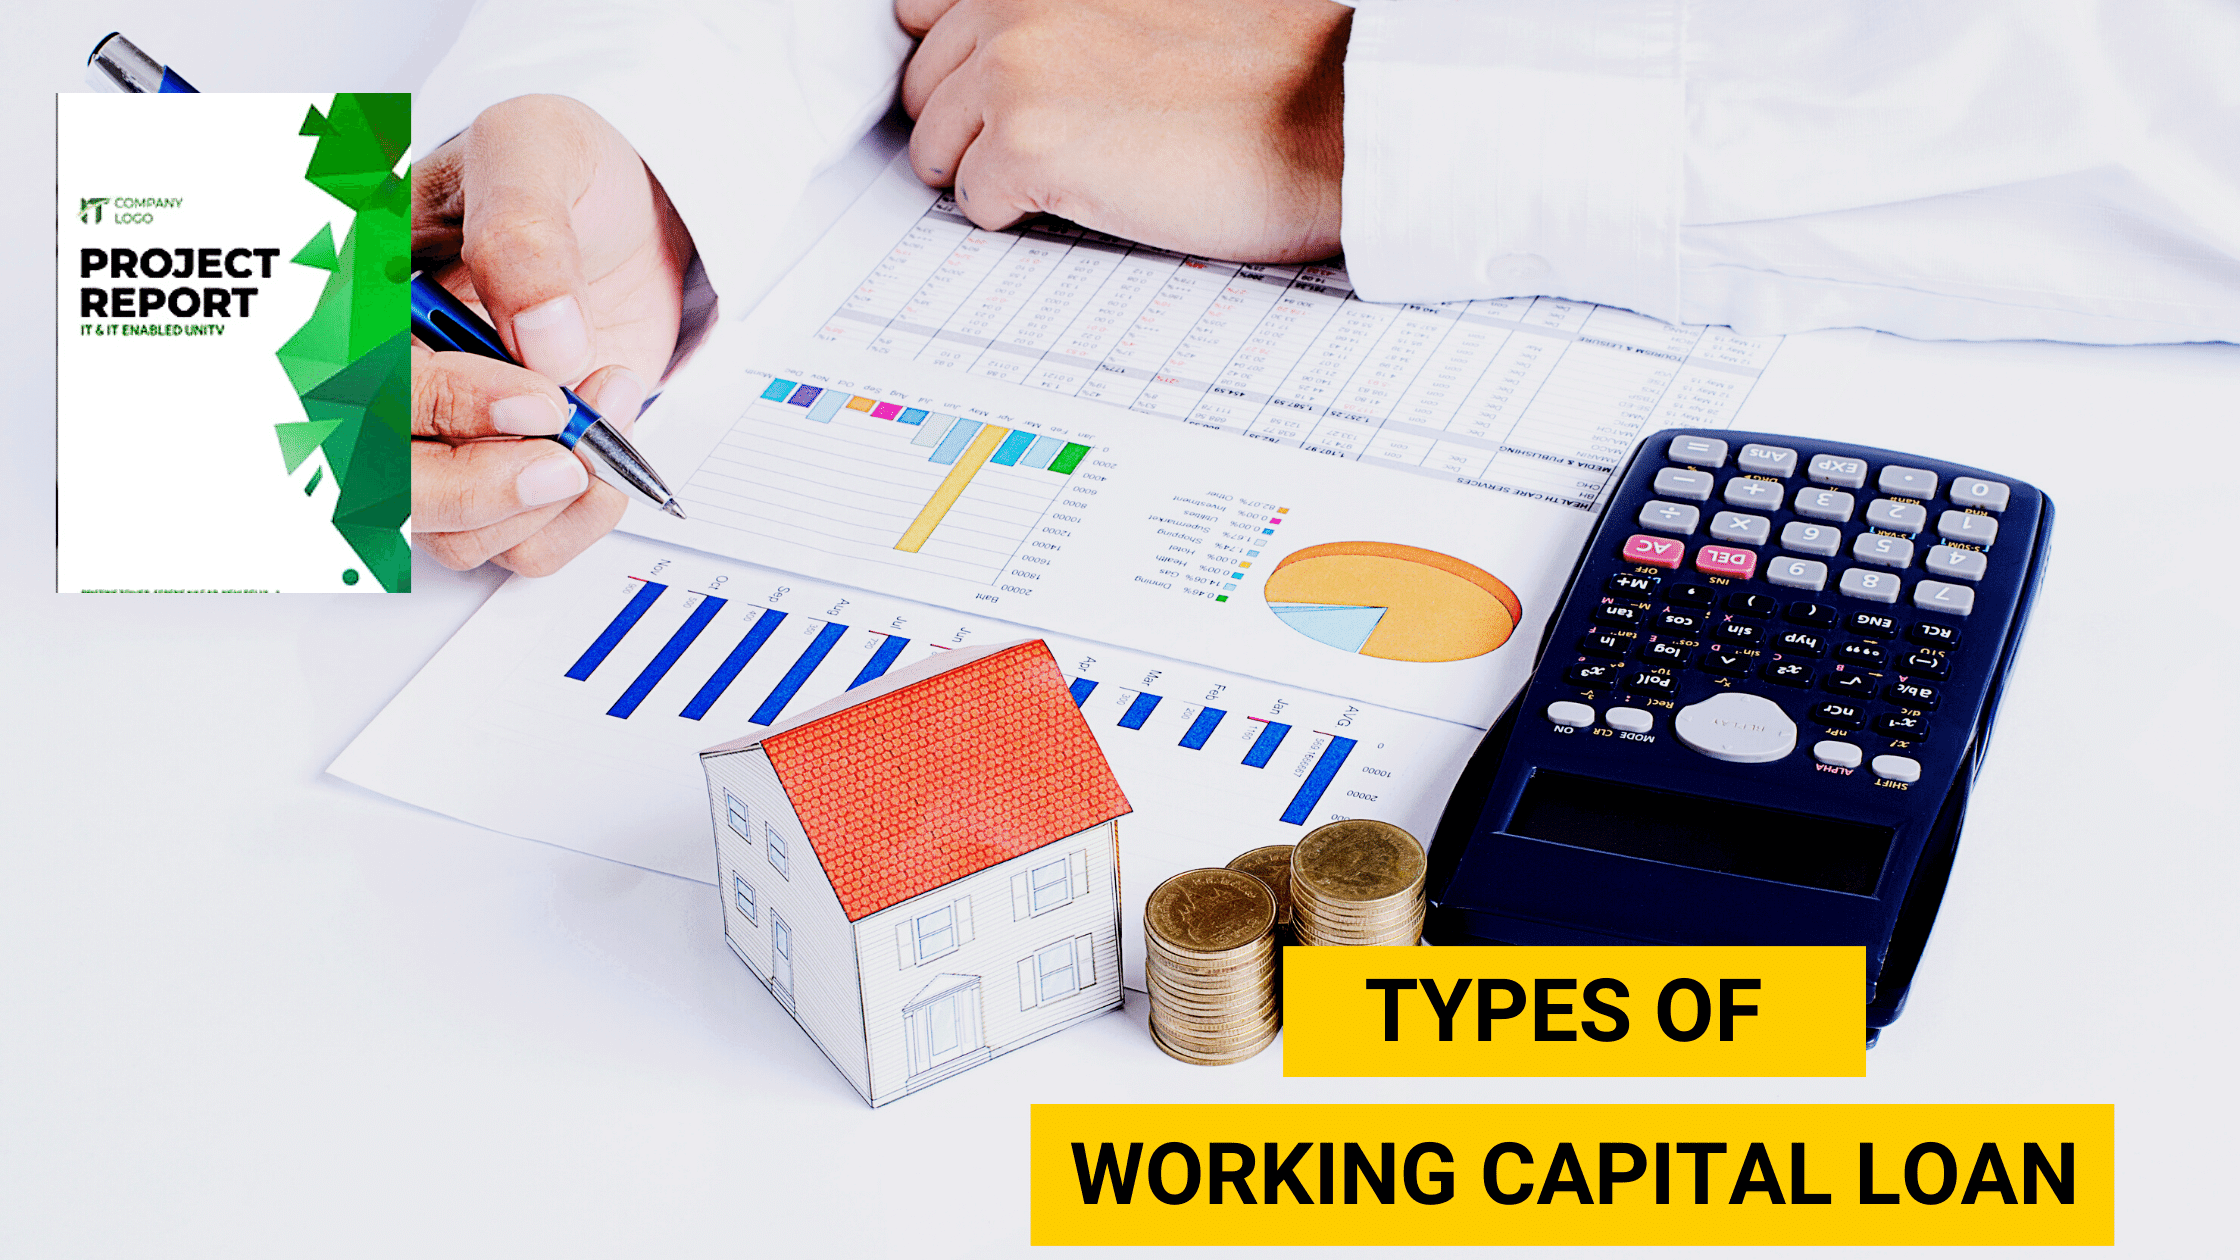 Types of Working Capital Loan Project report builder for bank loan